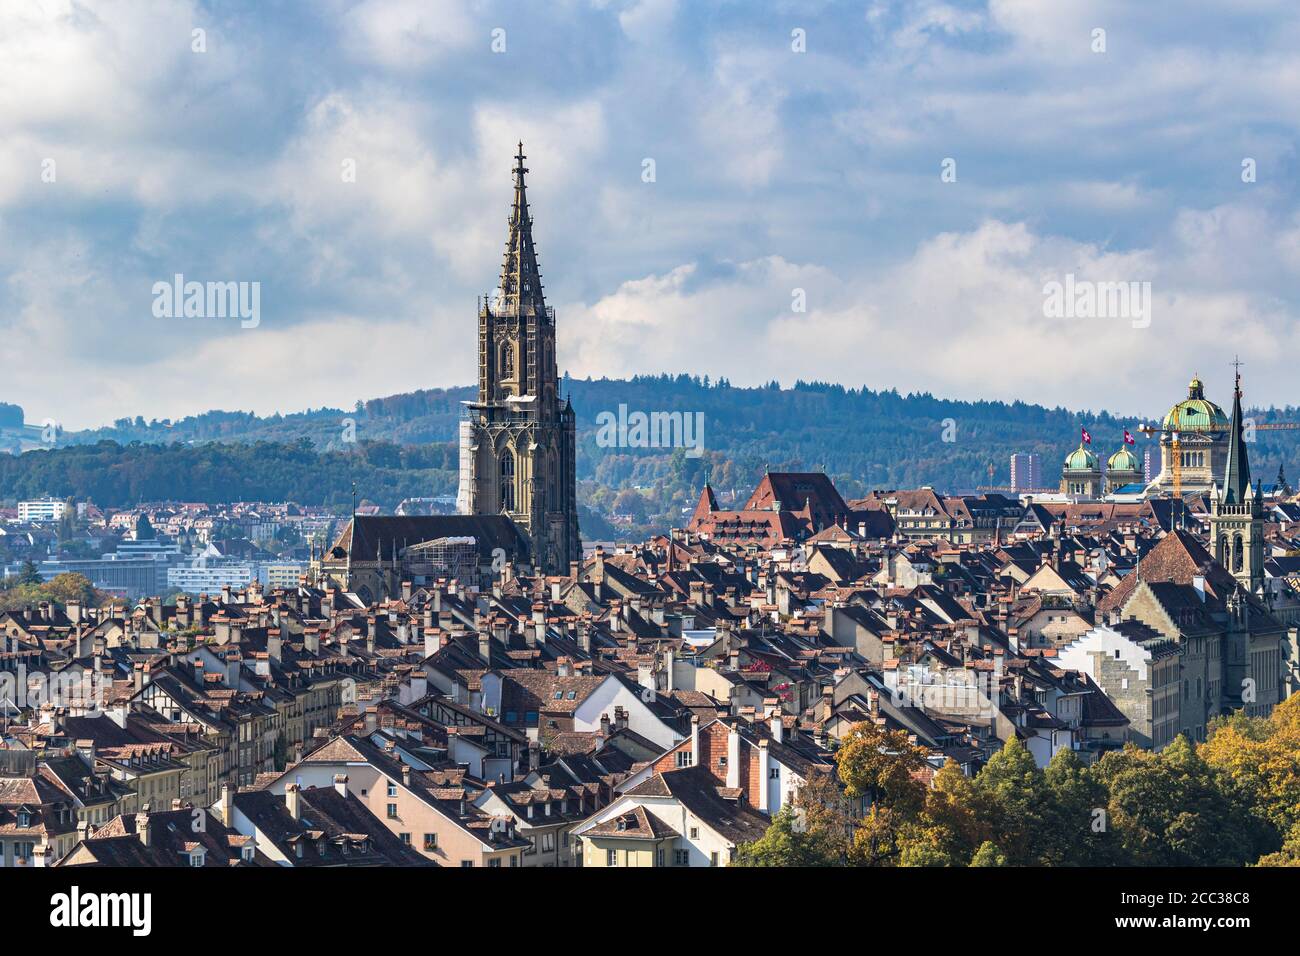 Stunning aerial view of Bern old town with Bern Minster (Münster) cathedral and Swiss Federal Palace (Bundeshaus), from Rosengarten on sunny autumn da Stock Photo